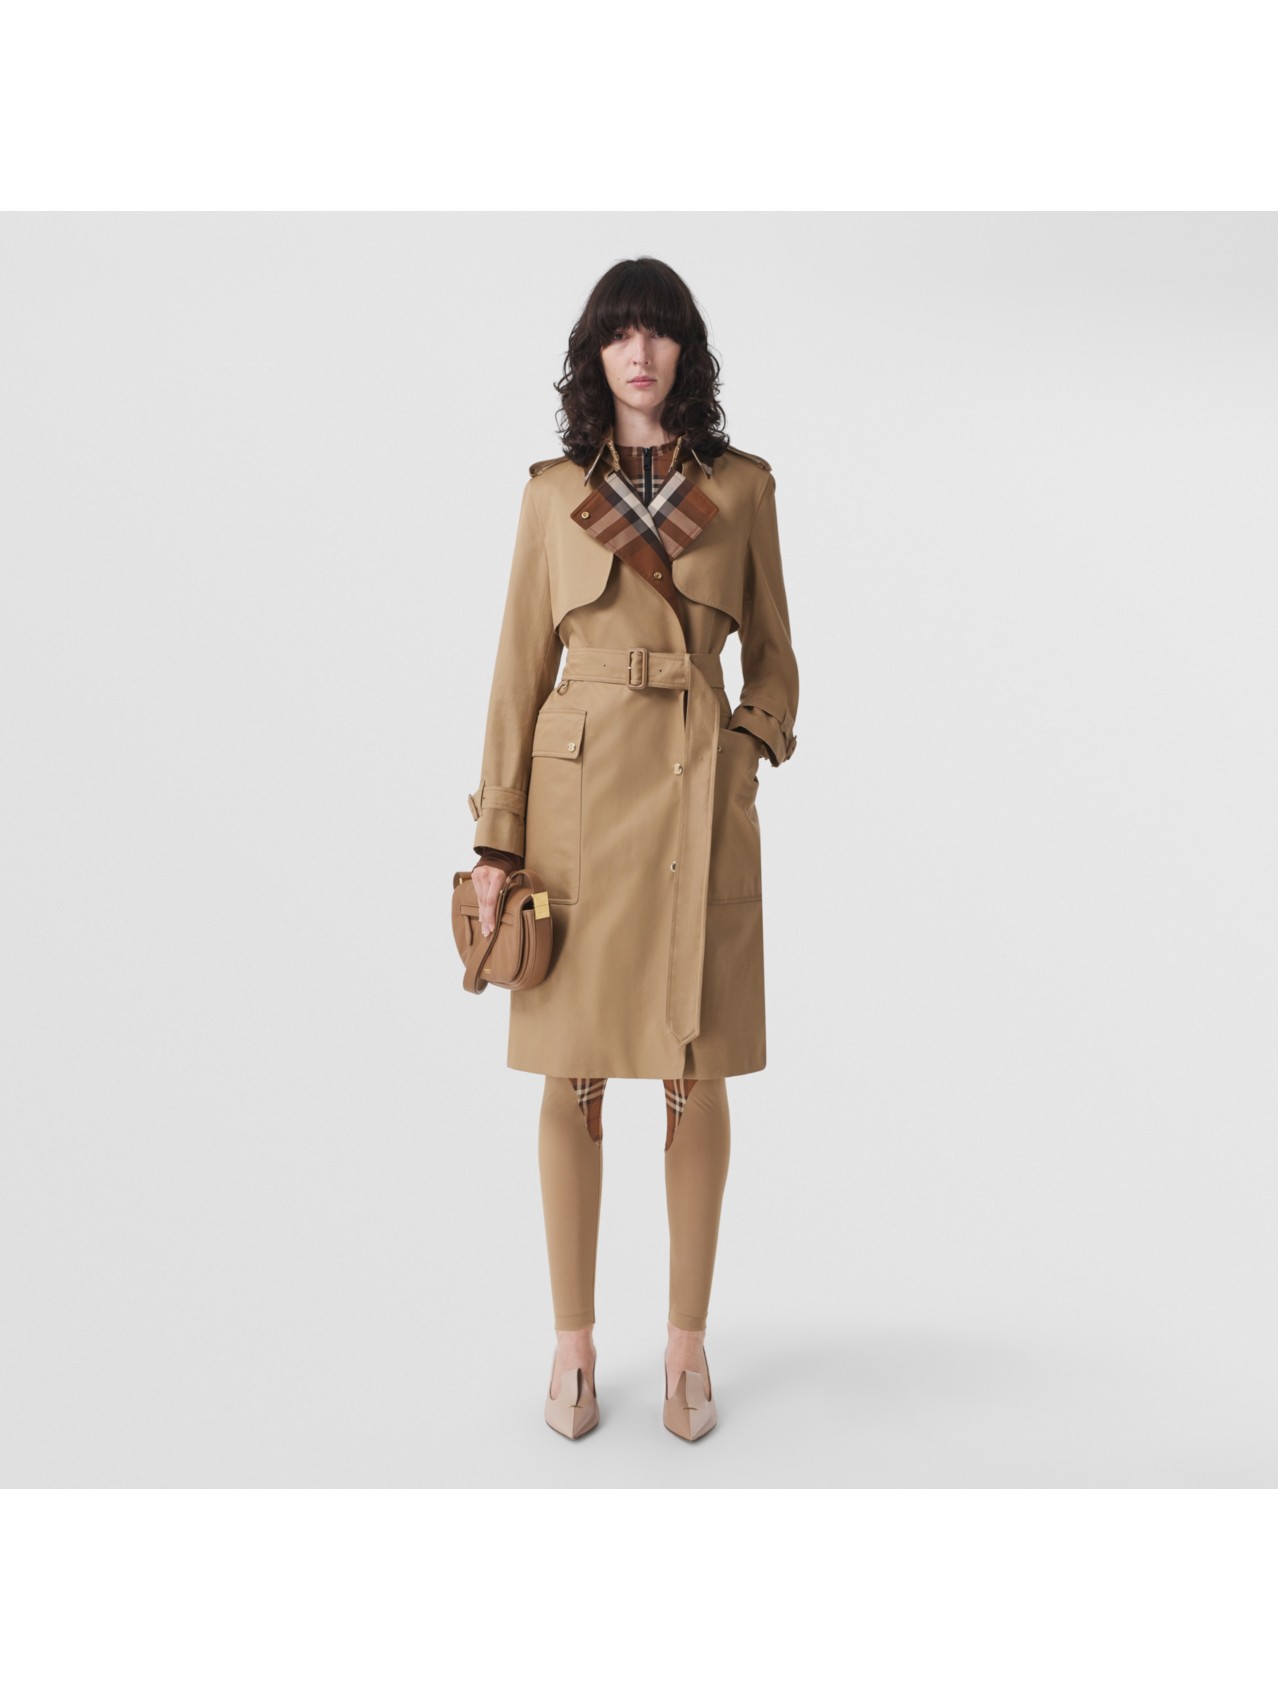 Women’s Unmistakably Burberry | Burberry® Official